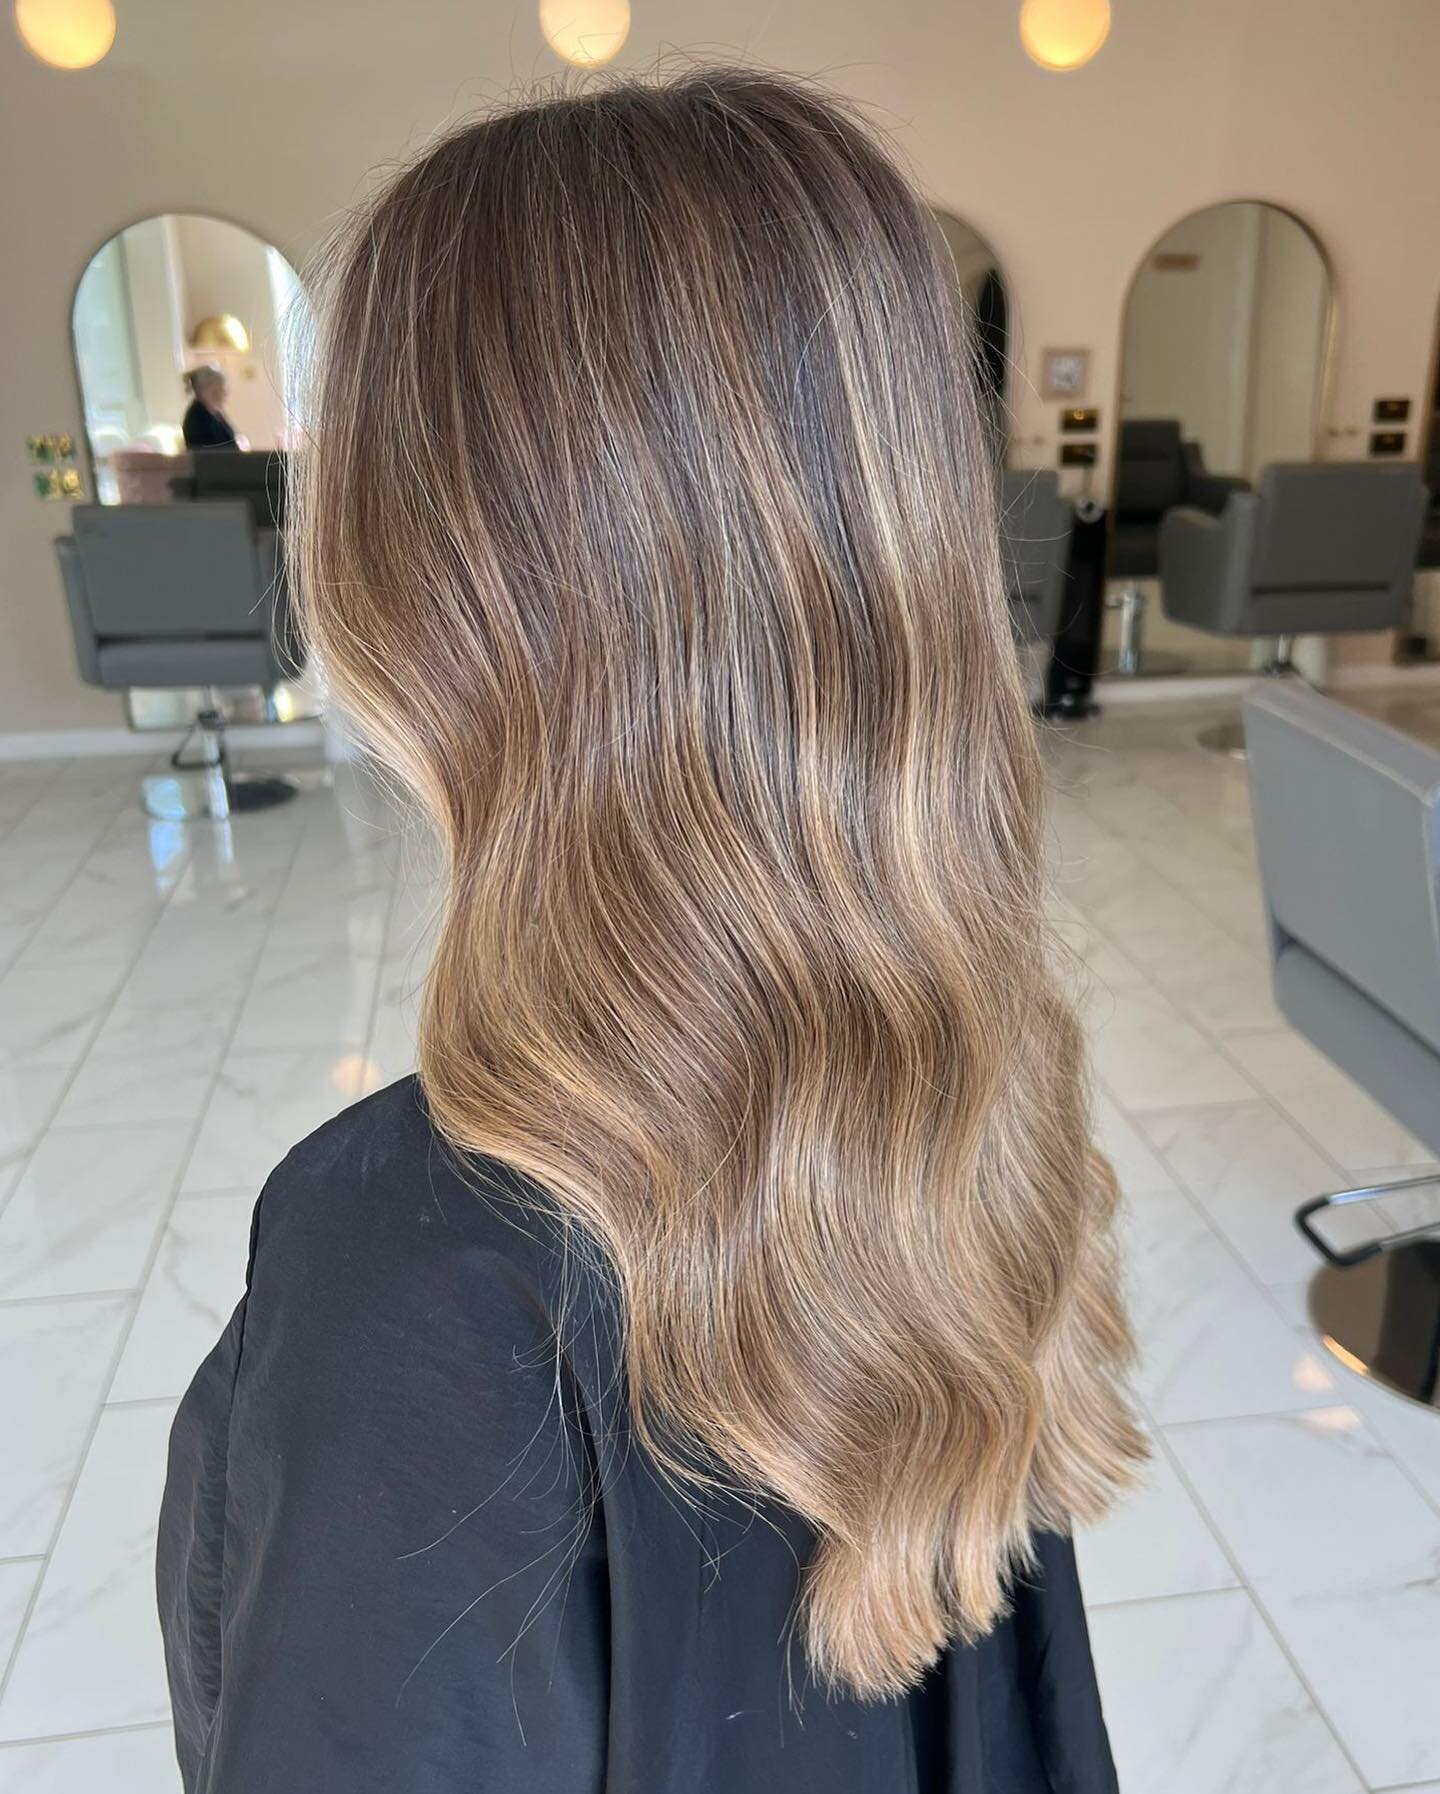 𝑻𝑨𝑲𝑰𝑵𝑮 𝑶𝑭𝑭 𝑰𝑵𝑪𝑯𝑬𝑺

Vikki hasn&rsquo;t touched the length or colour of her hair in a few years, but this transformation by Char has left Vikki&rsquo;s hair brighter and healthier

Service: I Want it All Package, Cut and Blowdry

Cost: &